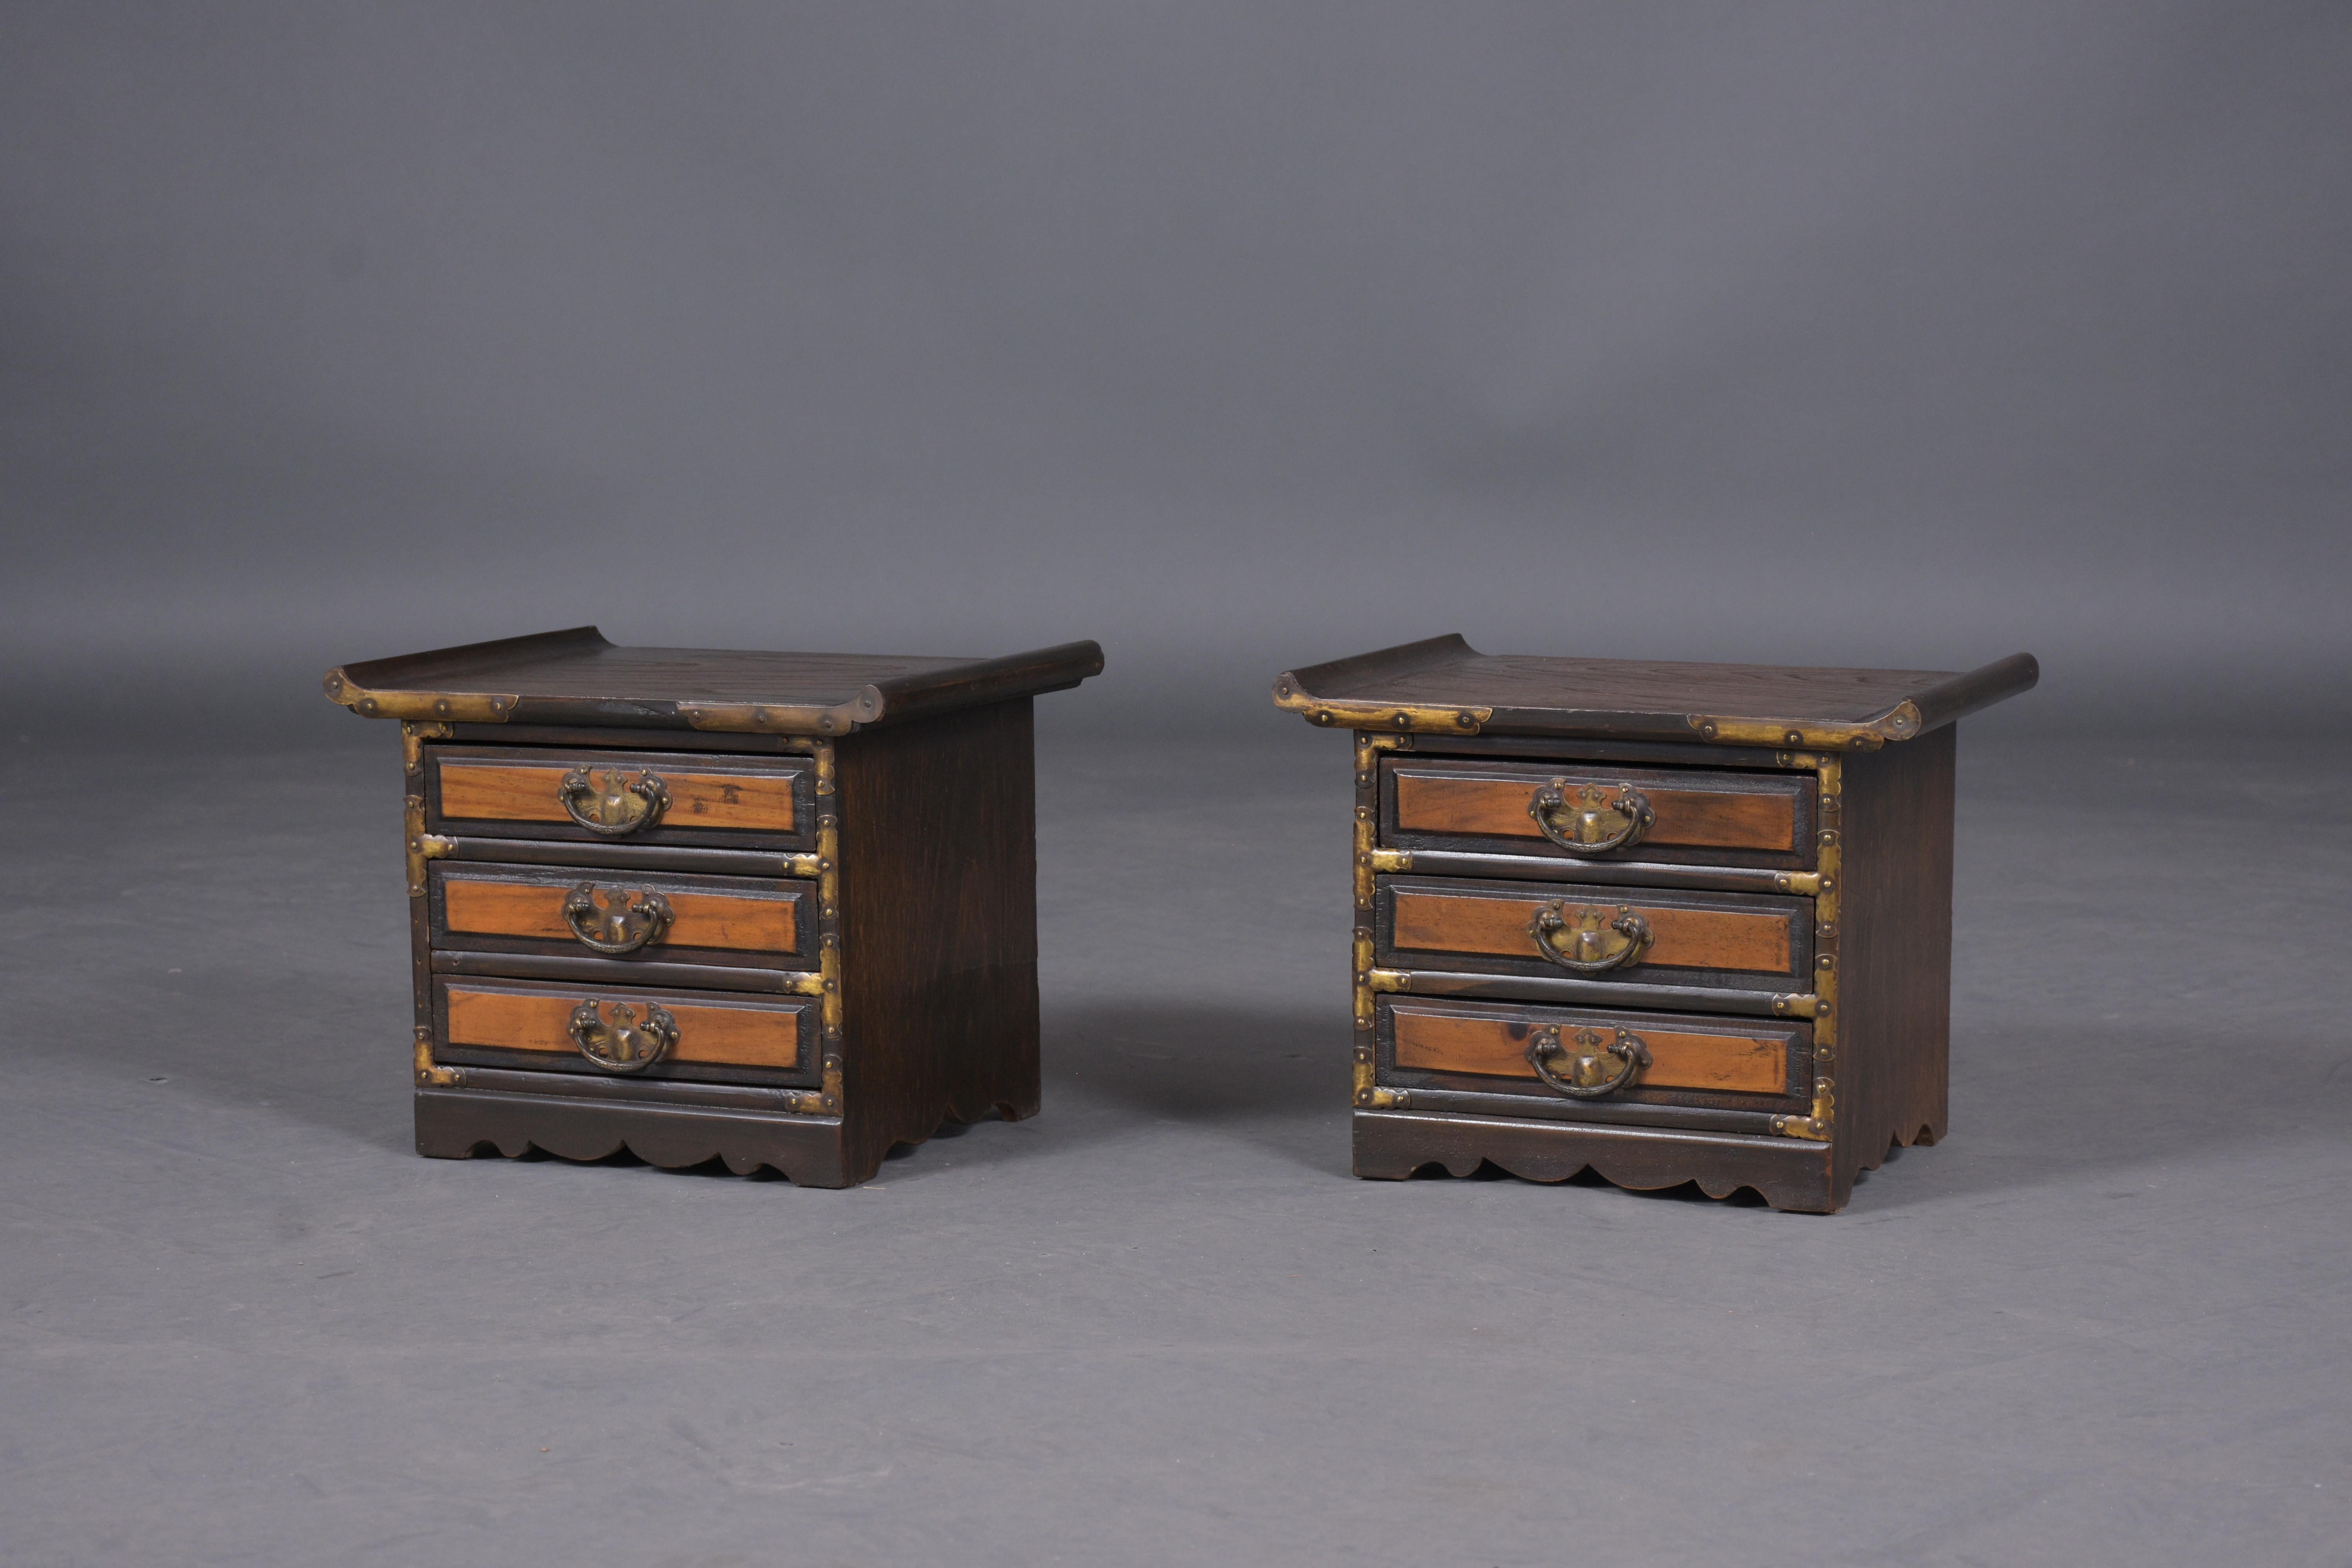 An extraordinary pair of tansu cabinets hand-crafted out of elmwood in good condition that has been professionally restored. This fabulous pair of cabinets feature a dark & light walnut stain finish that has been only waxed and polished developing a